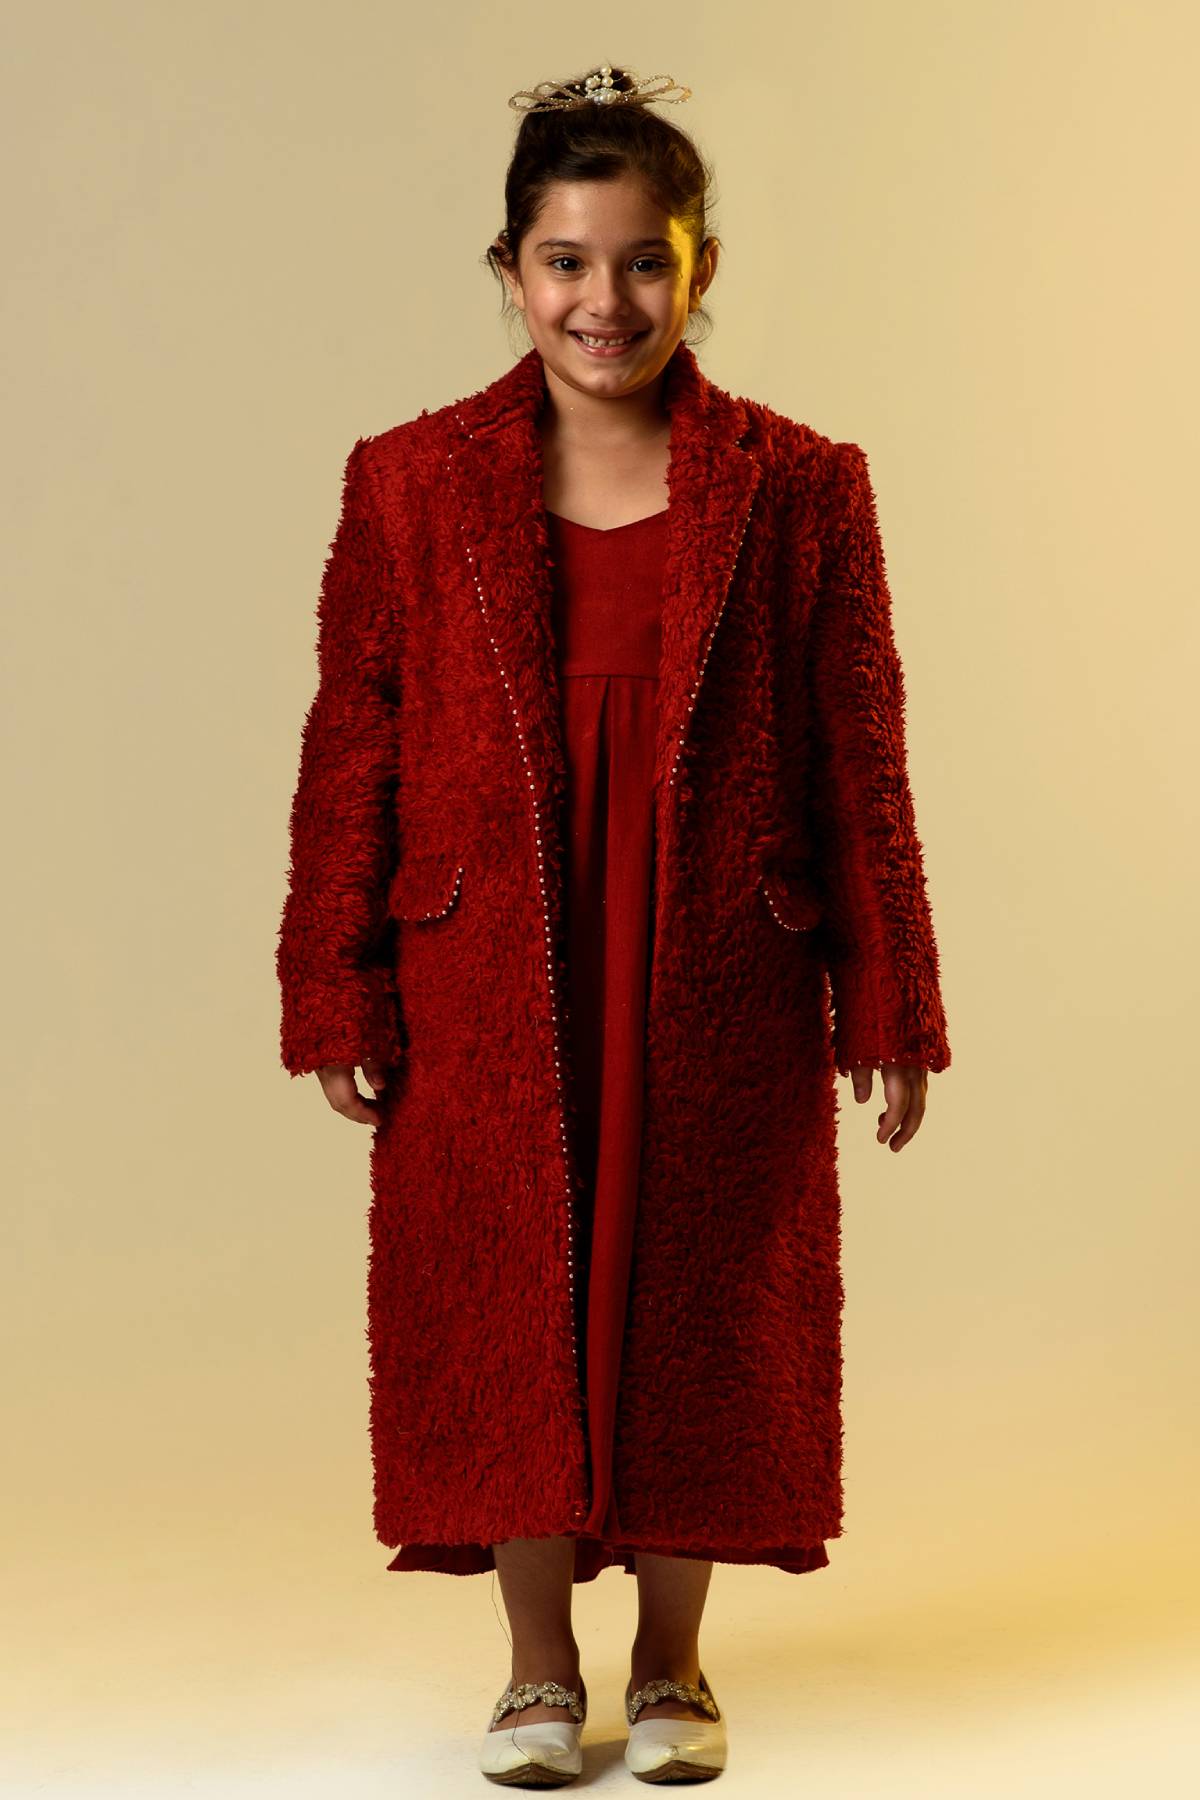 Buy Kids Designer Littleens Fusion set with oversized coat made of organic sherpa with embroidered detailing paired with woollen long dress Online at ScrollnShops